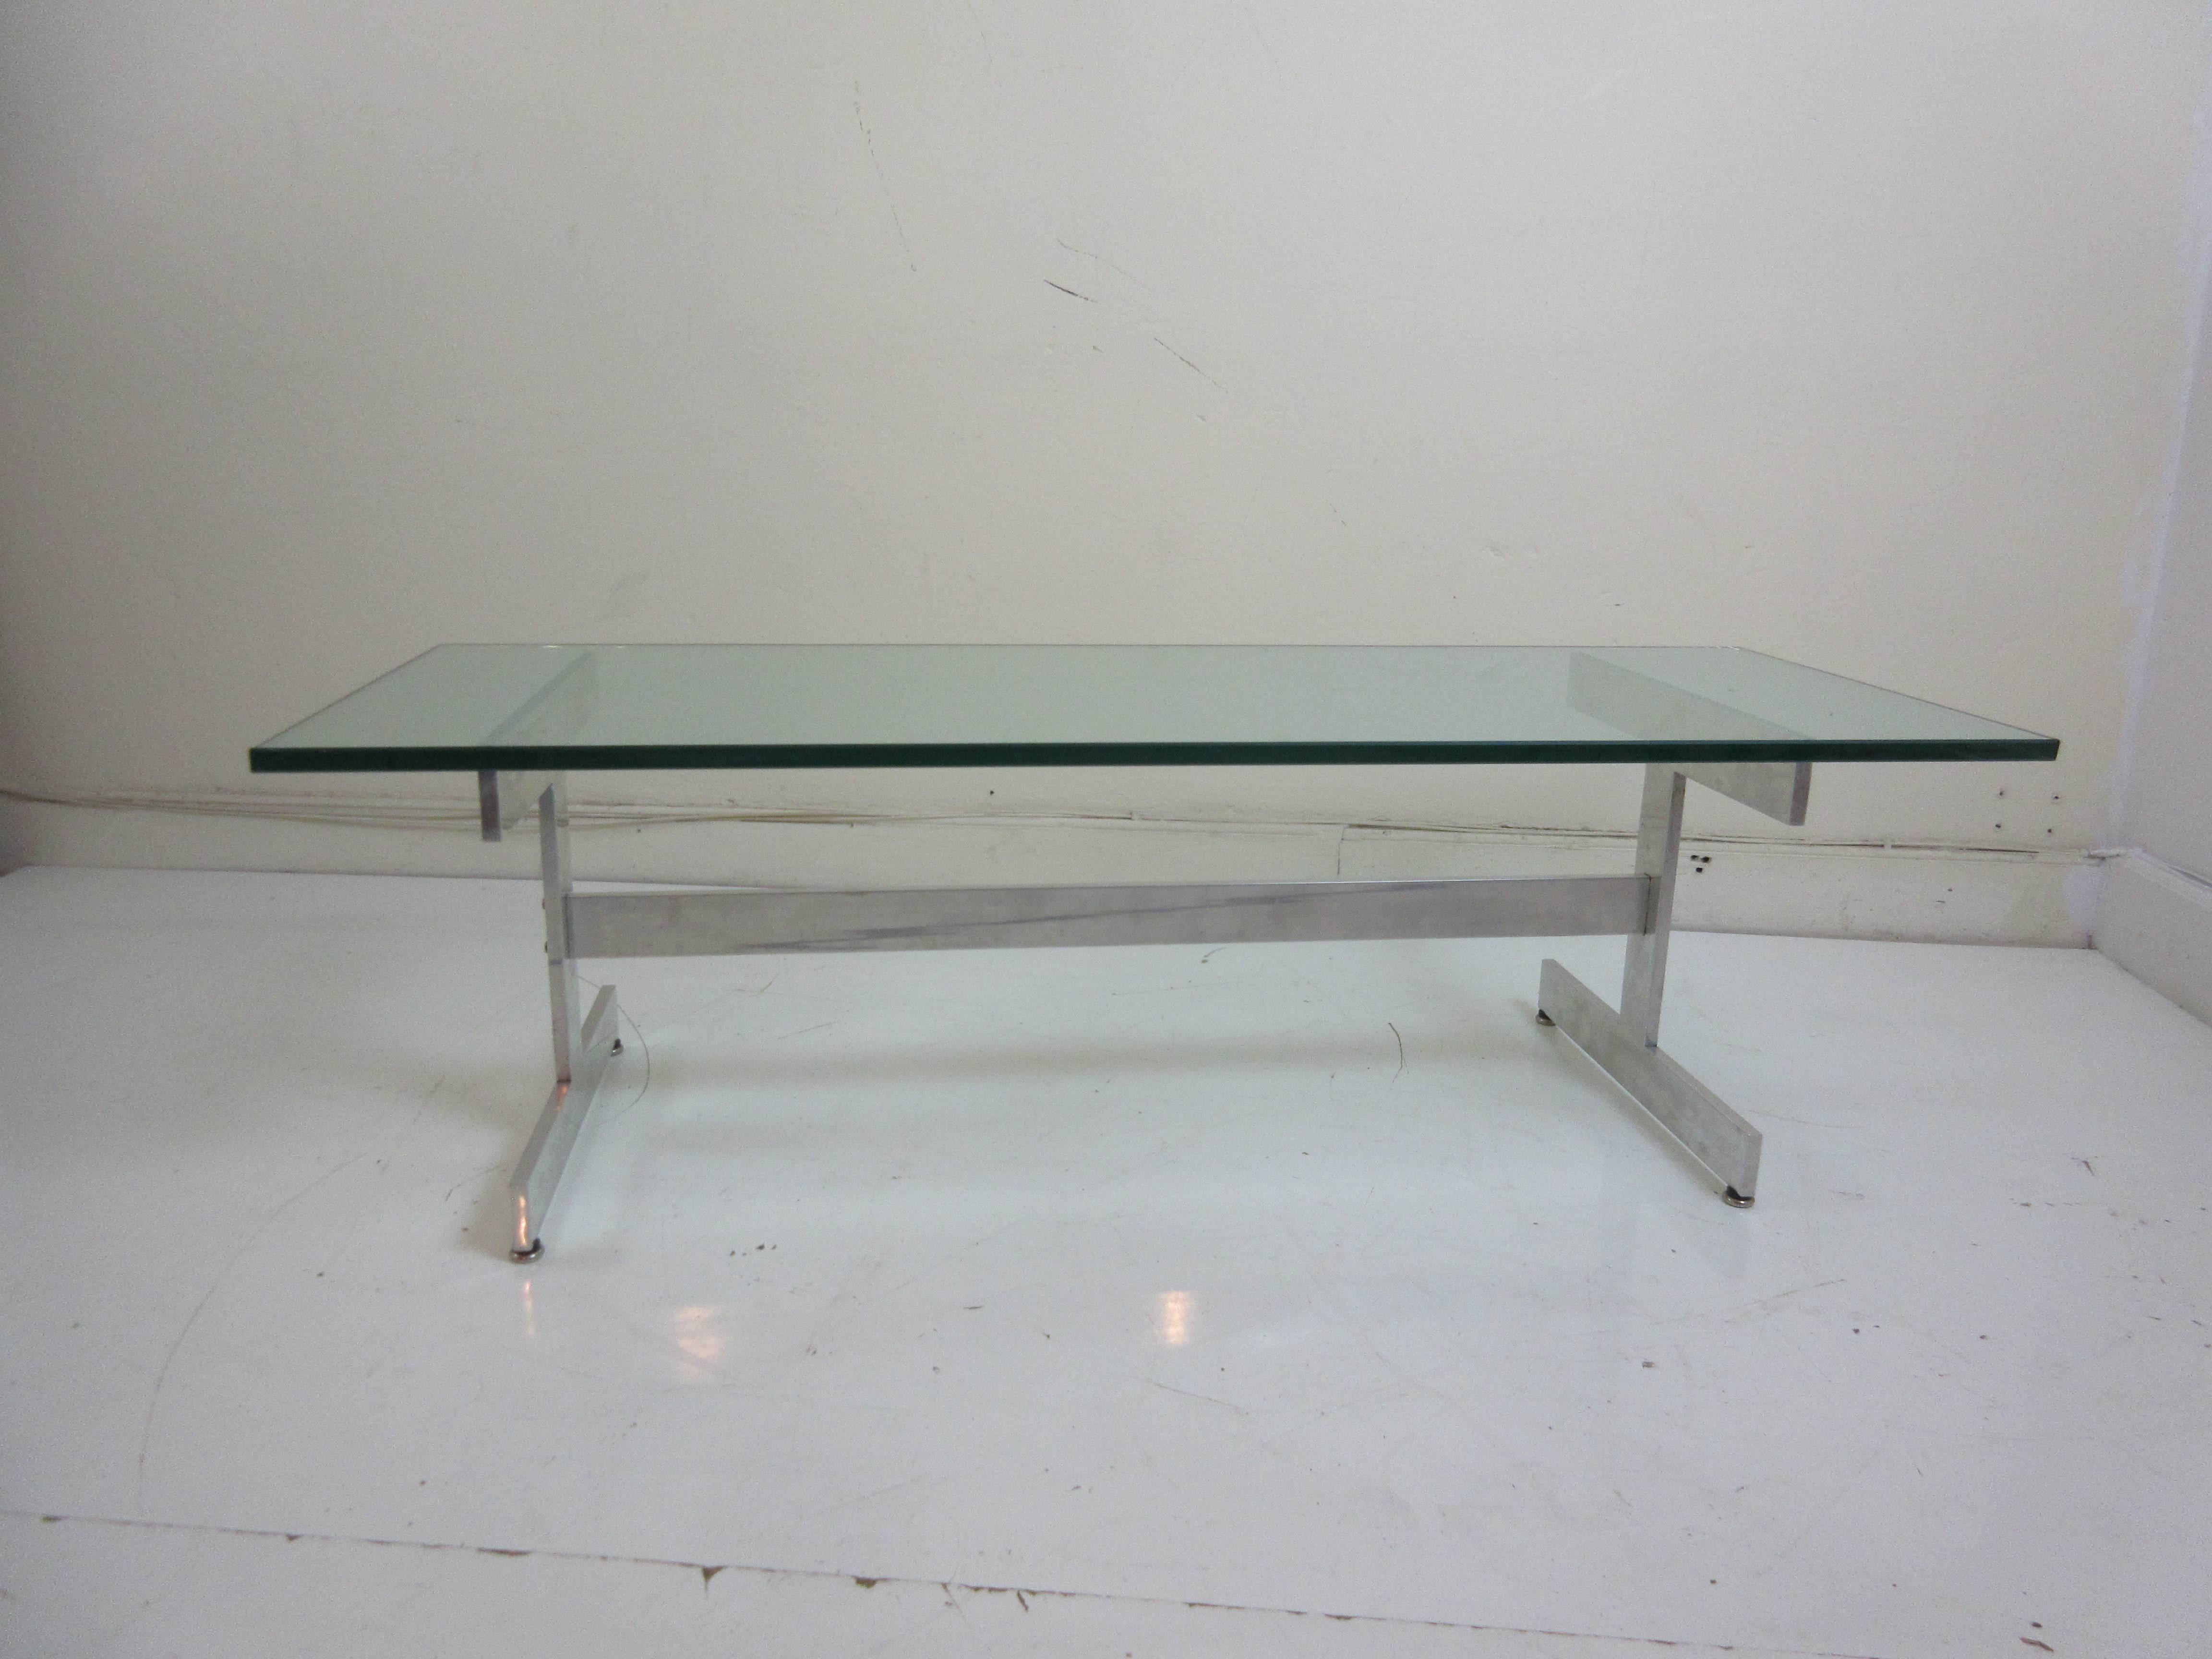 Glass and aluminium coffee table with trestle base connecting H-shaped supports on either side.